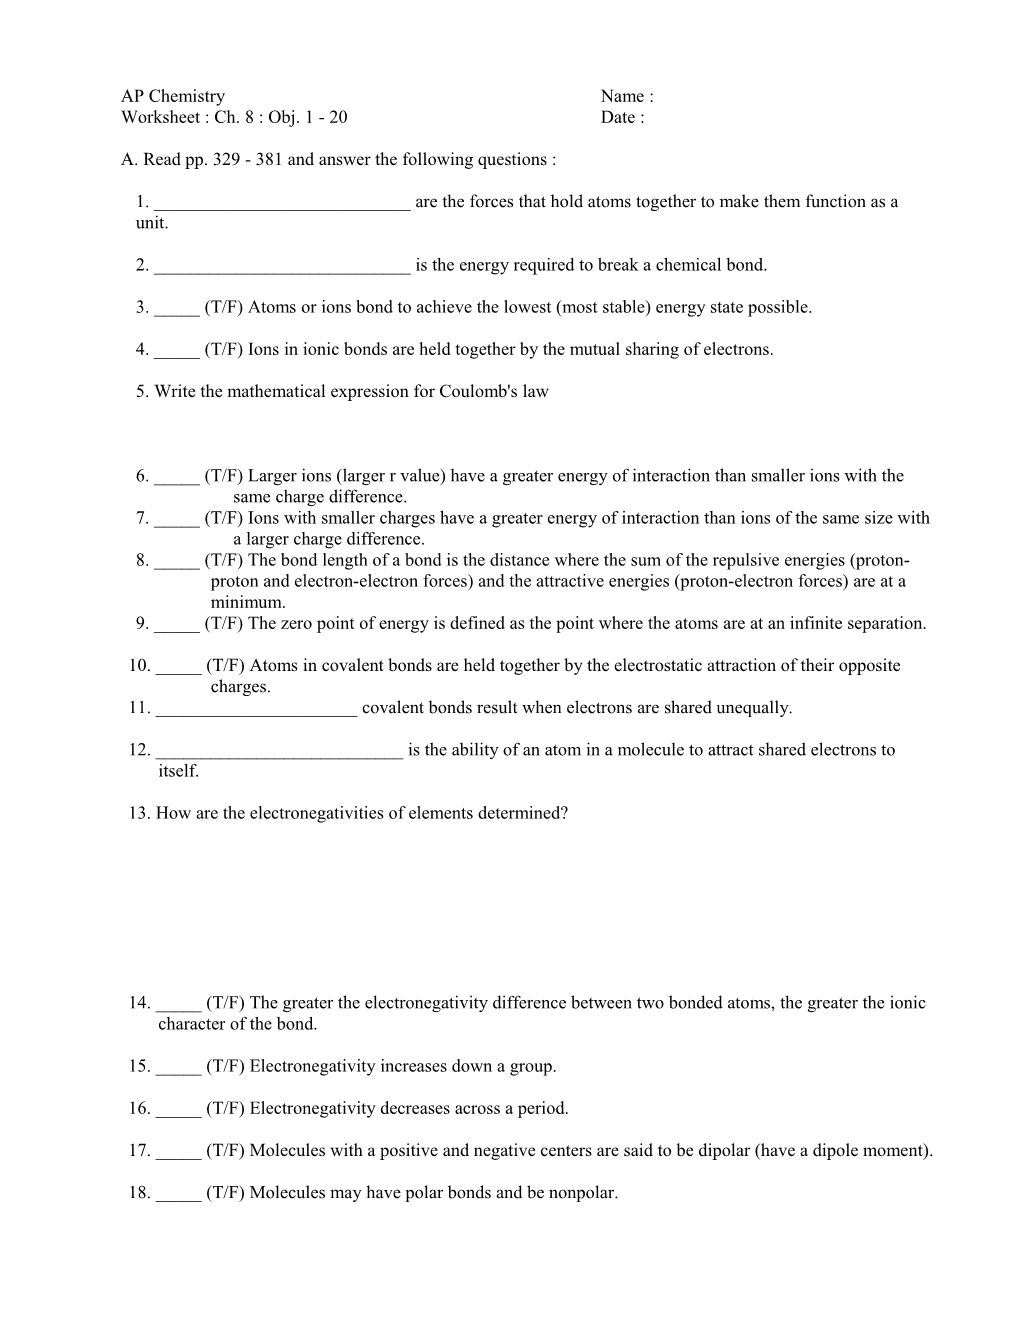 A. Read Pp. 329 - 381 and Answer the Following Questions